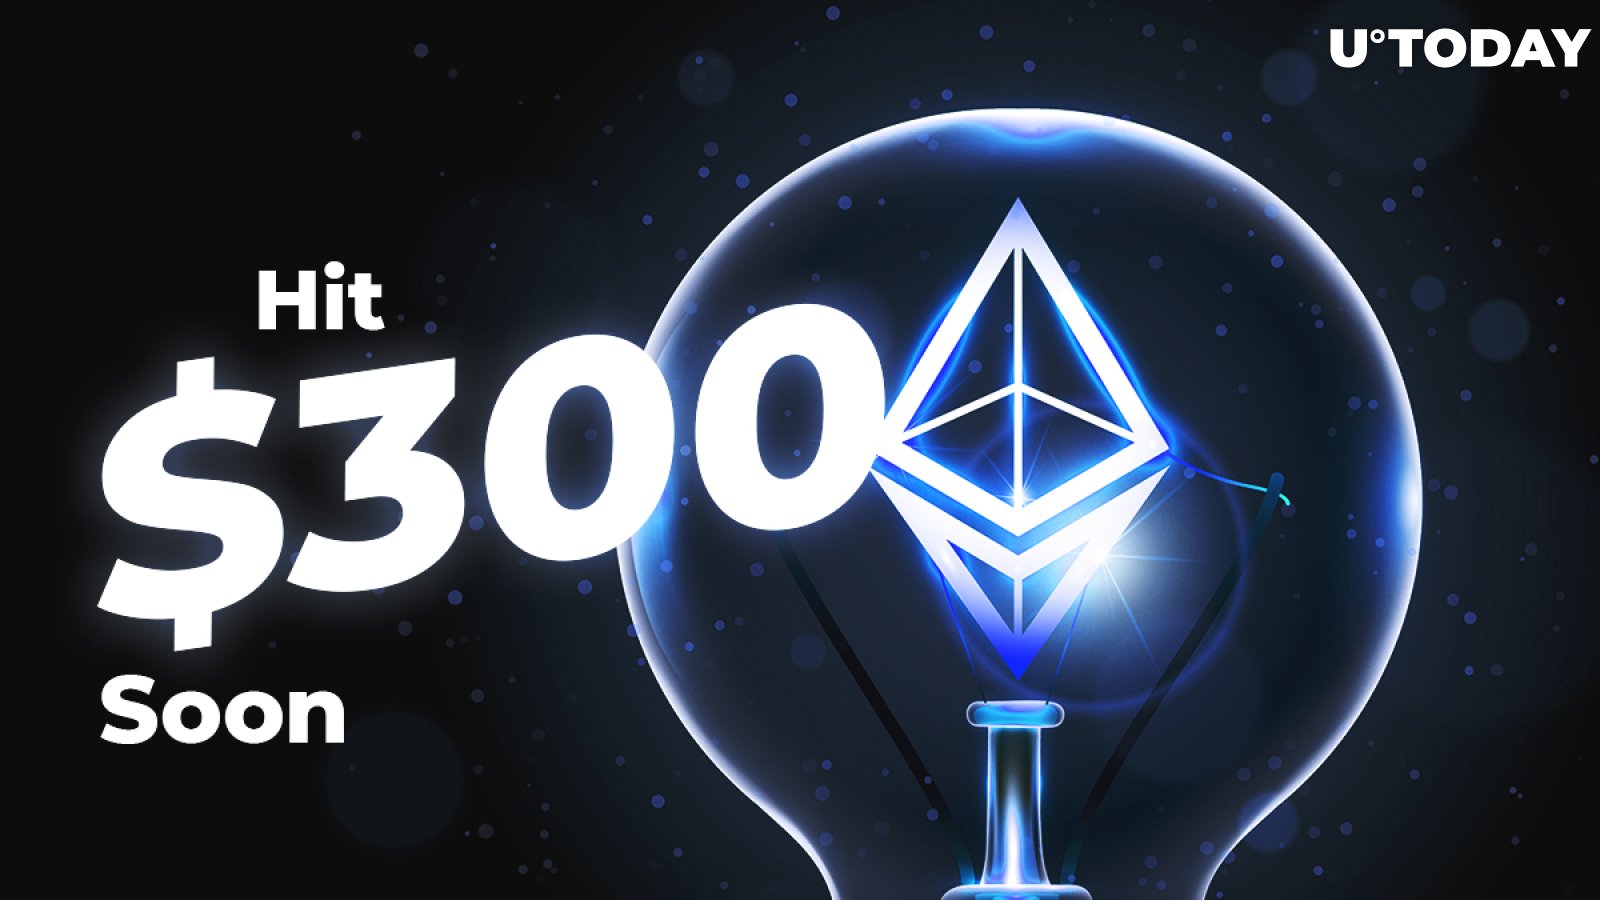 Ethereum (ETH) Cost Still Has Chance to Hit $300 Soon. Find Out How to Trade ETH This Week